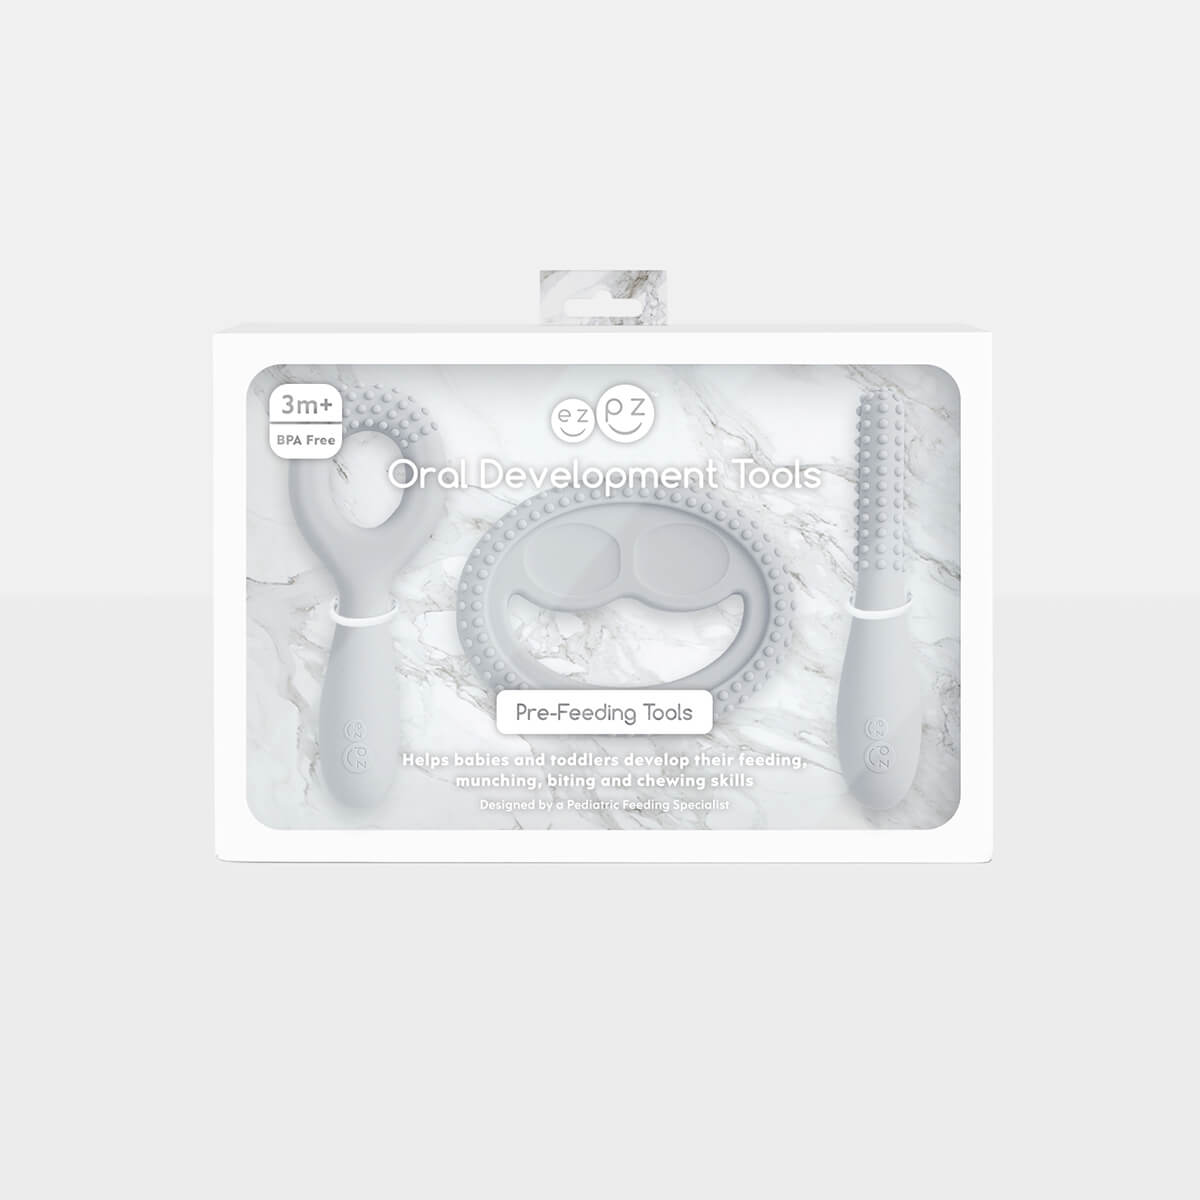 ezpz oral development tools in pewter light gray / silicone teethers for motor skill development